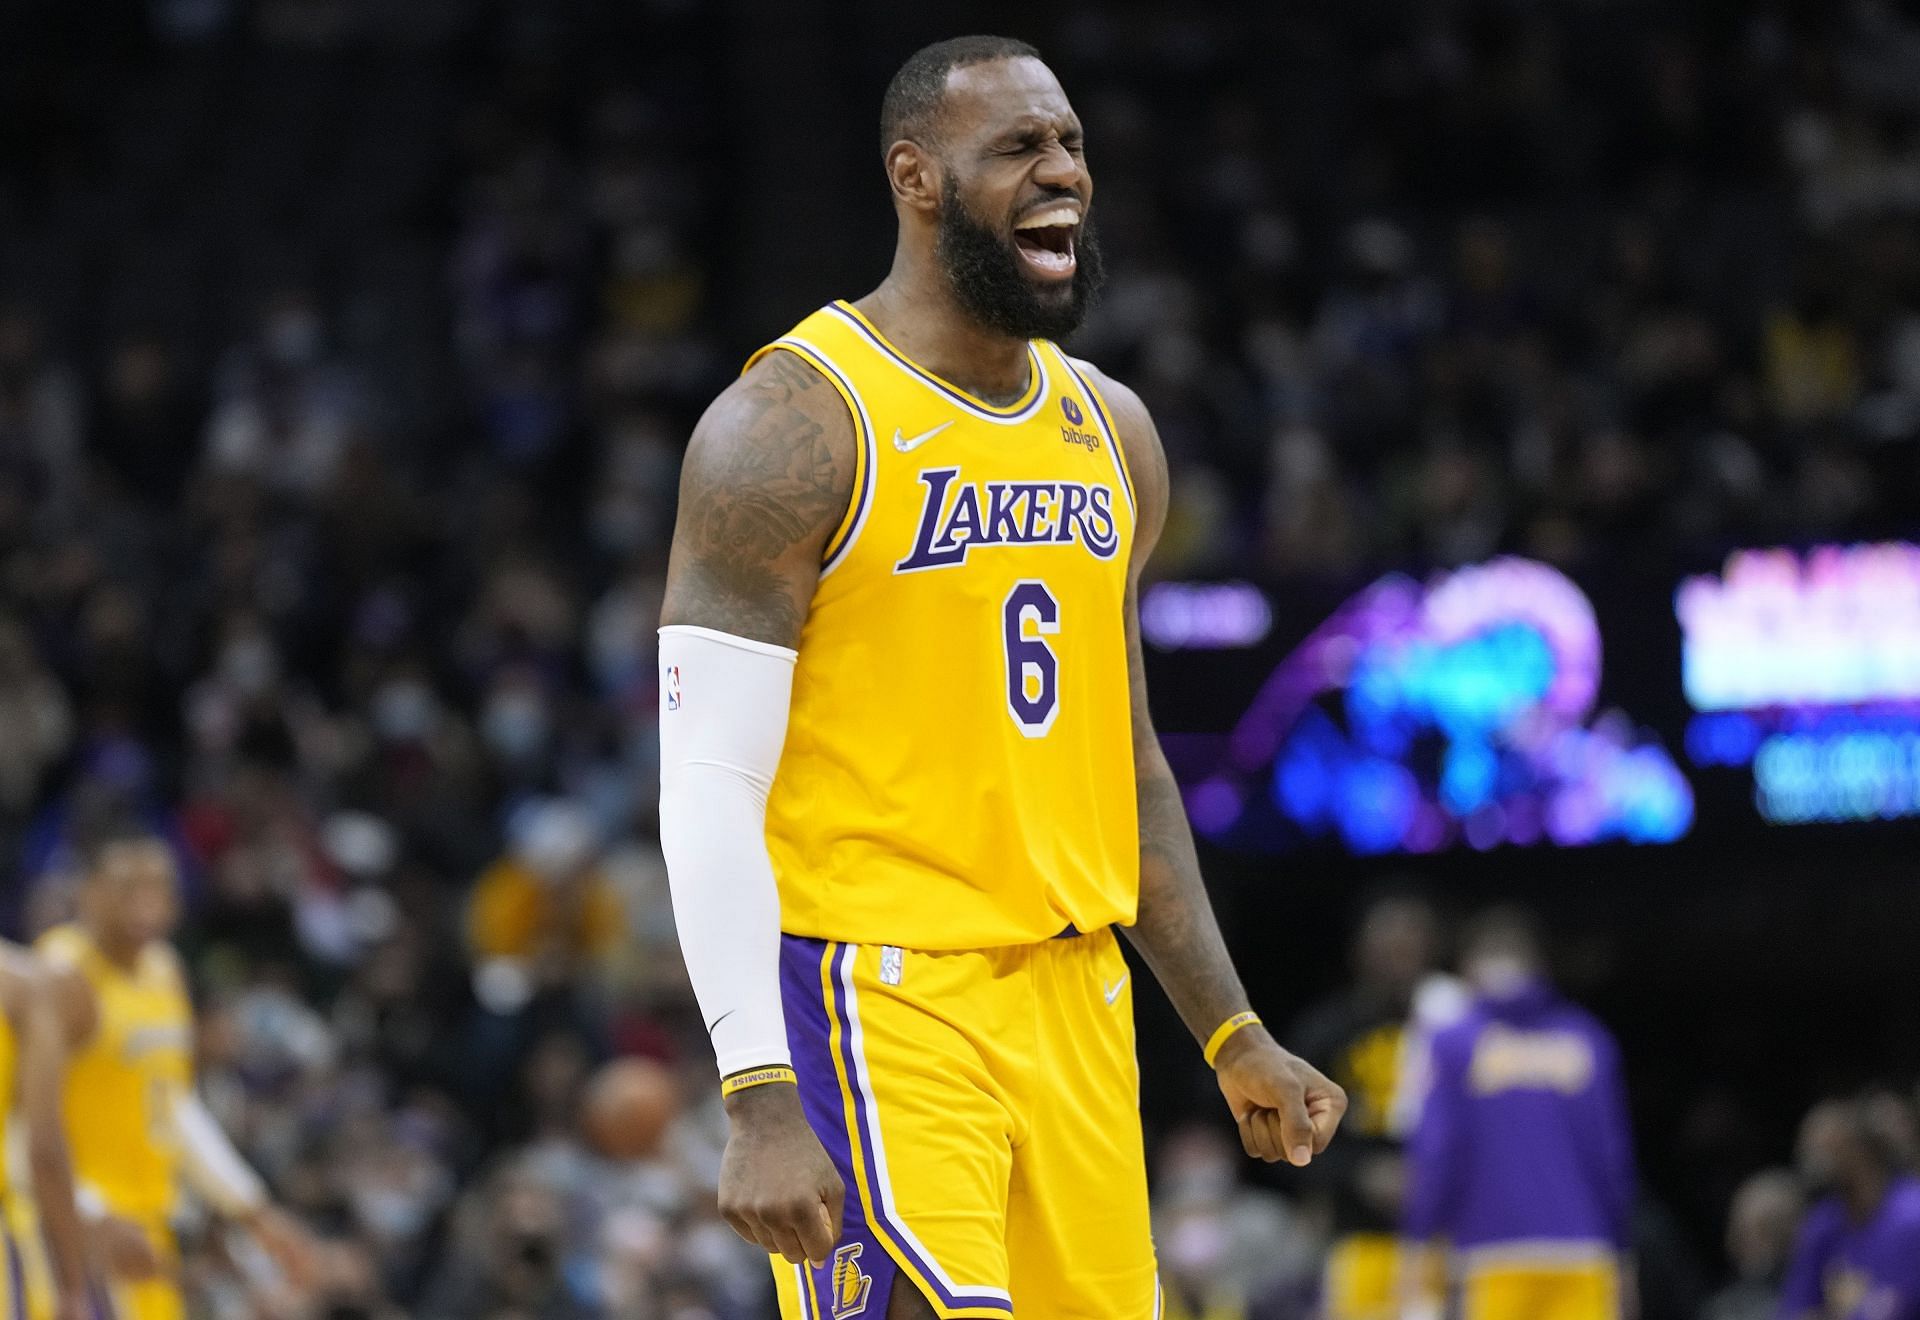 LA Lakers star LeBron James in action